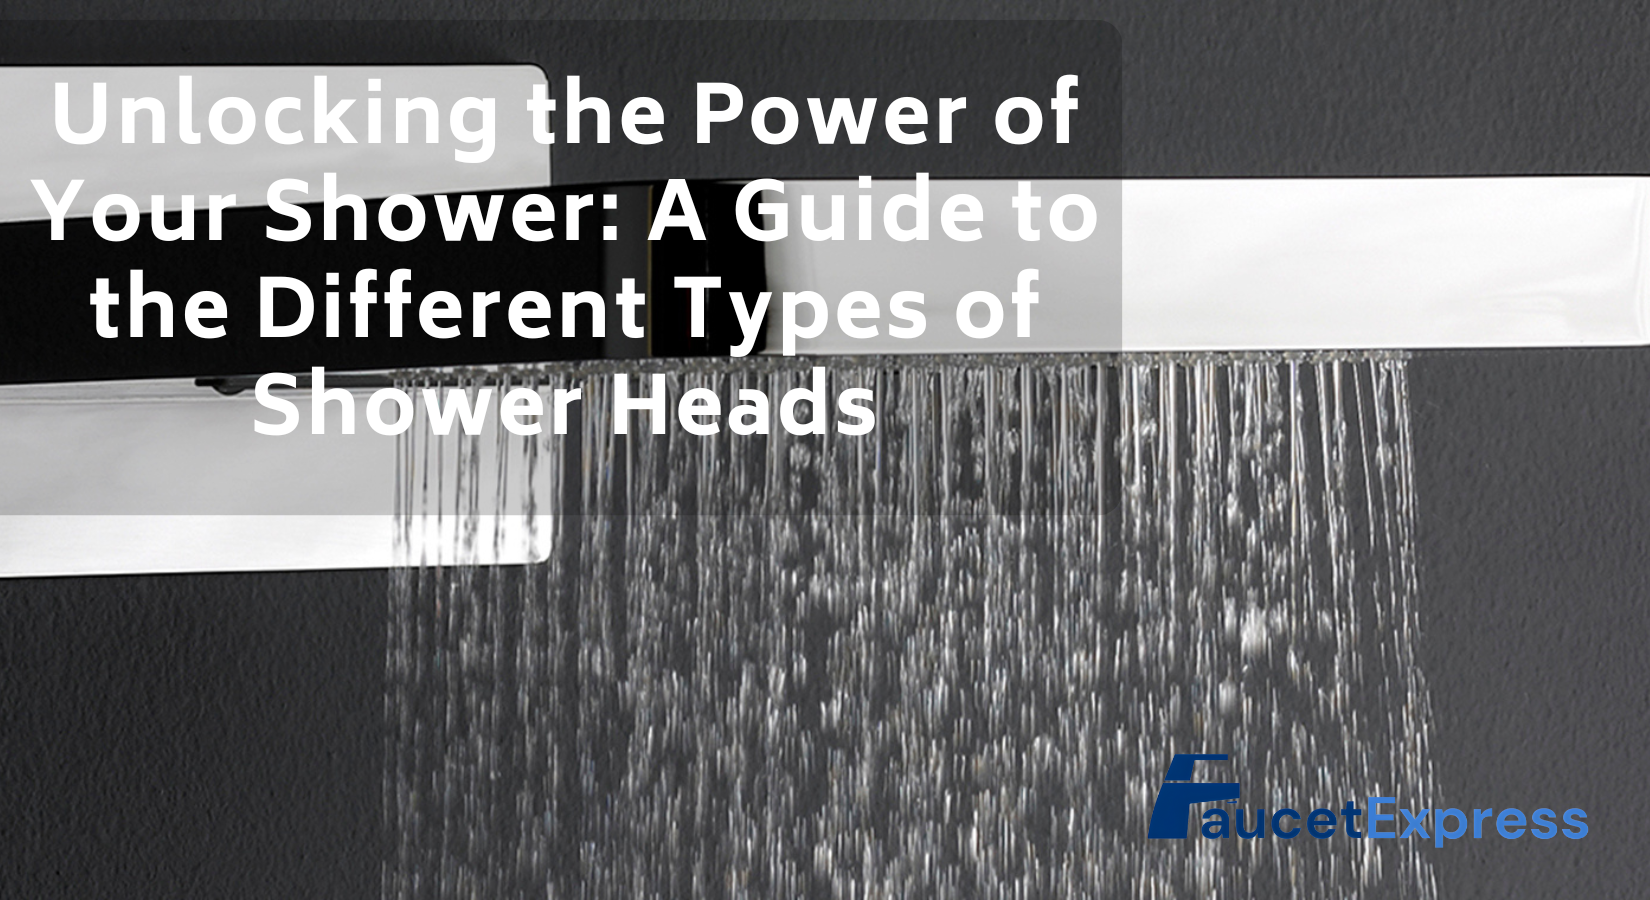 Unlocking the Power of Your Shower: A Guide to the Different Types of Shower Heads